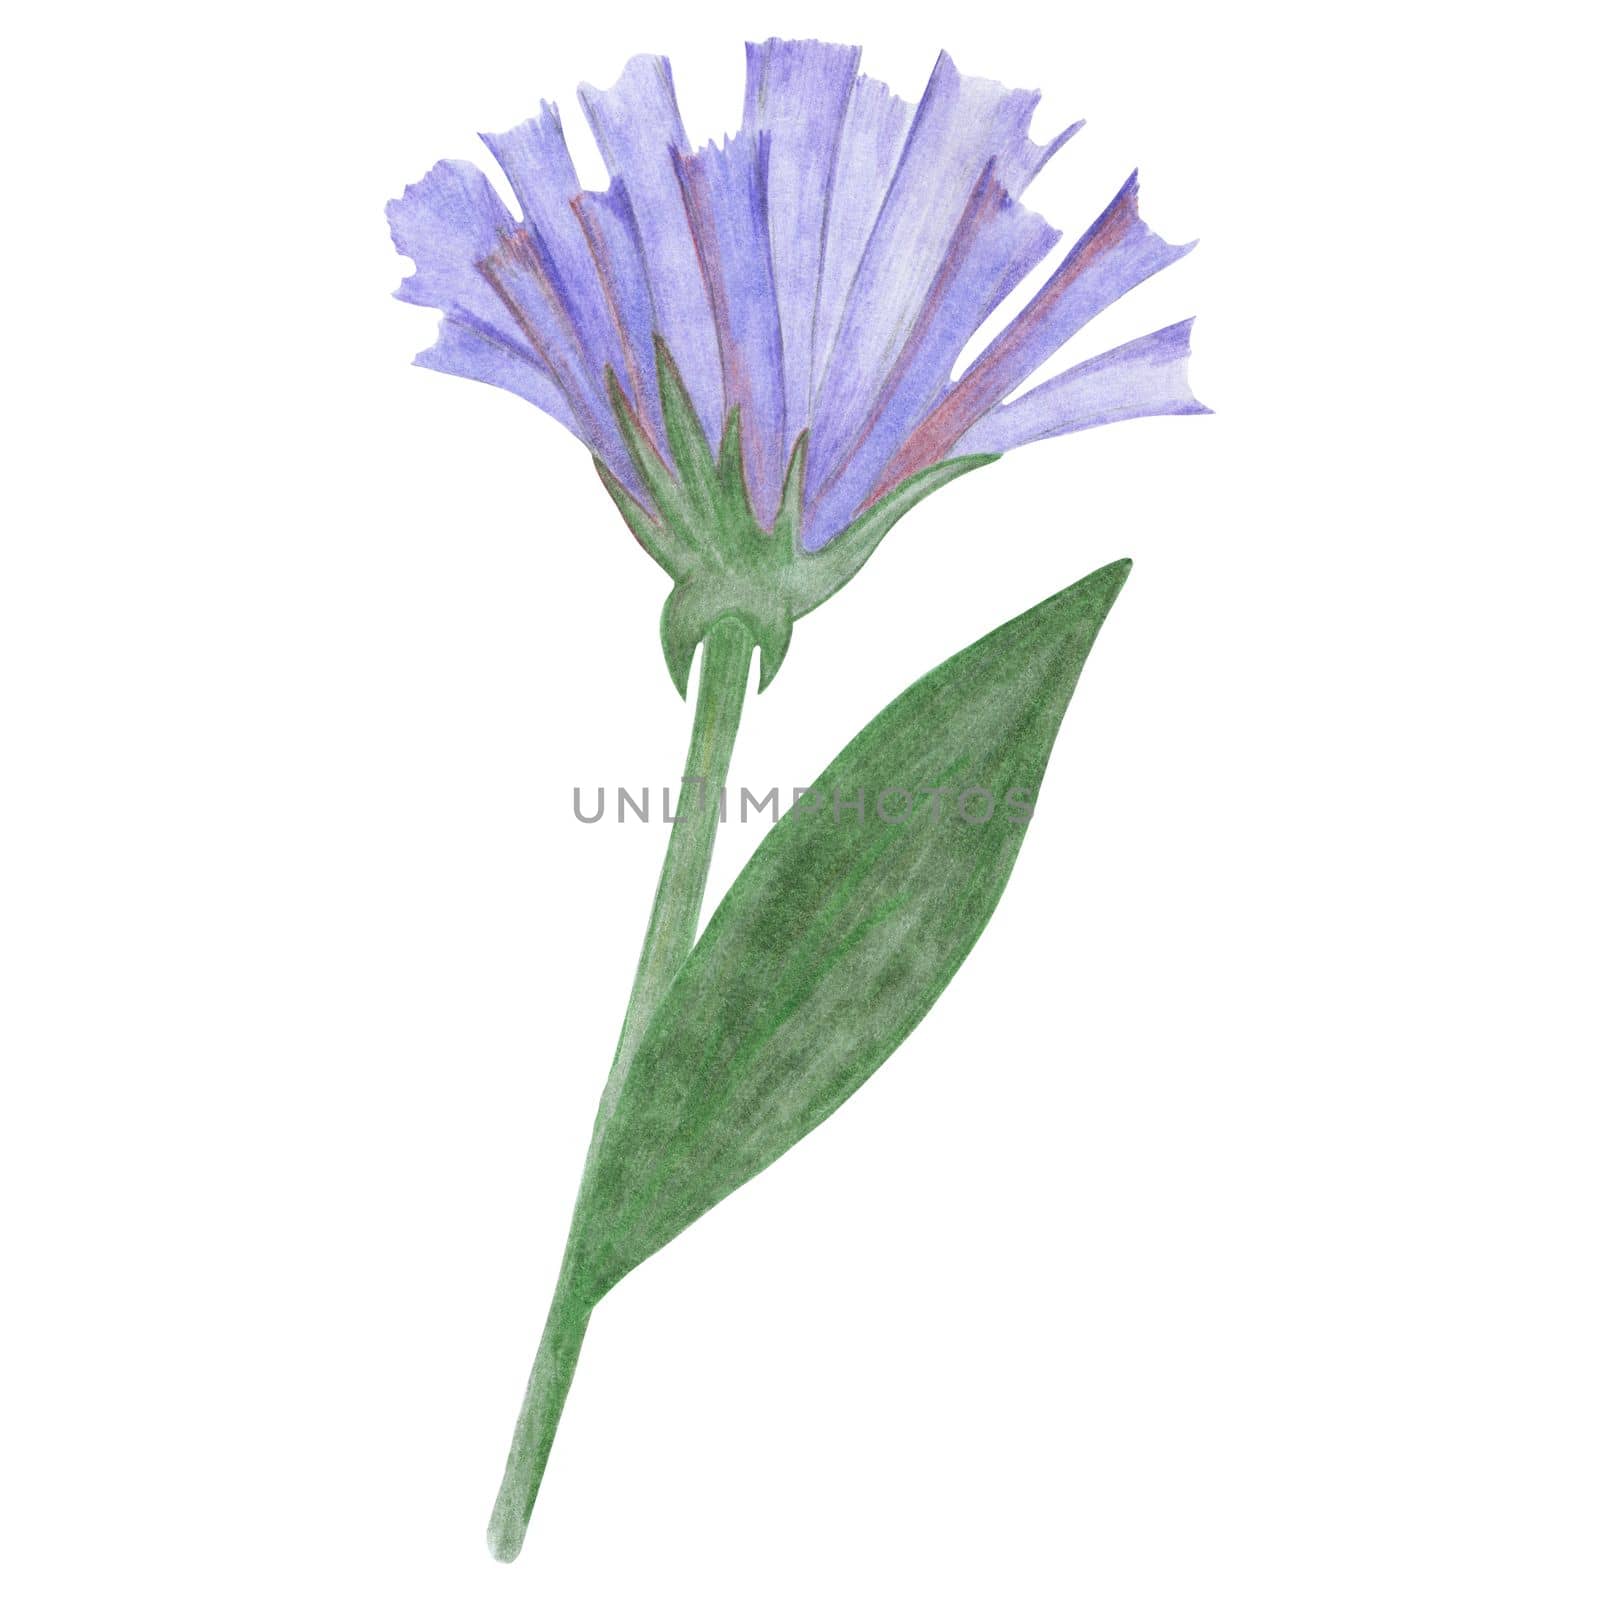 Blue Flowers with Green Leaves Isolated on White Background. Blue Flower Element Drawn by Colored Pencil.